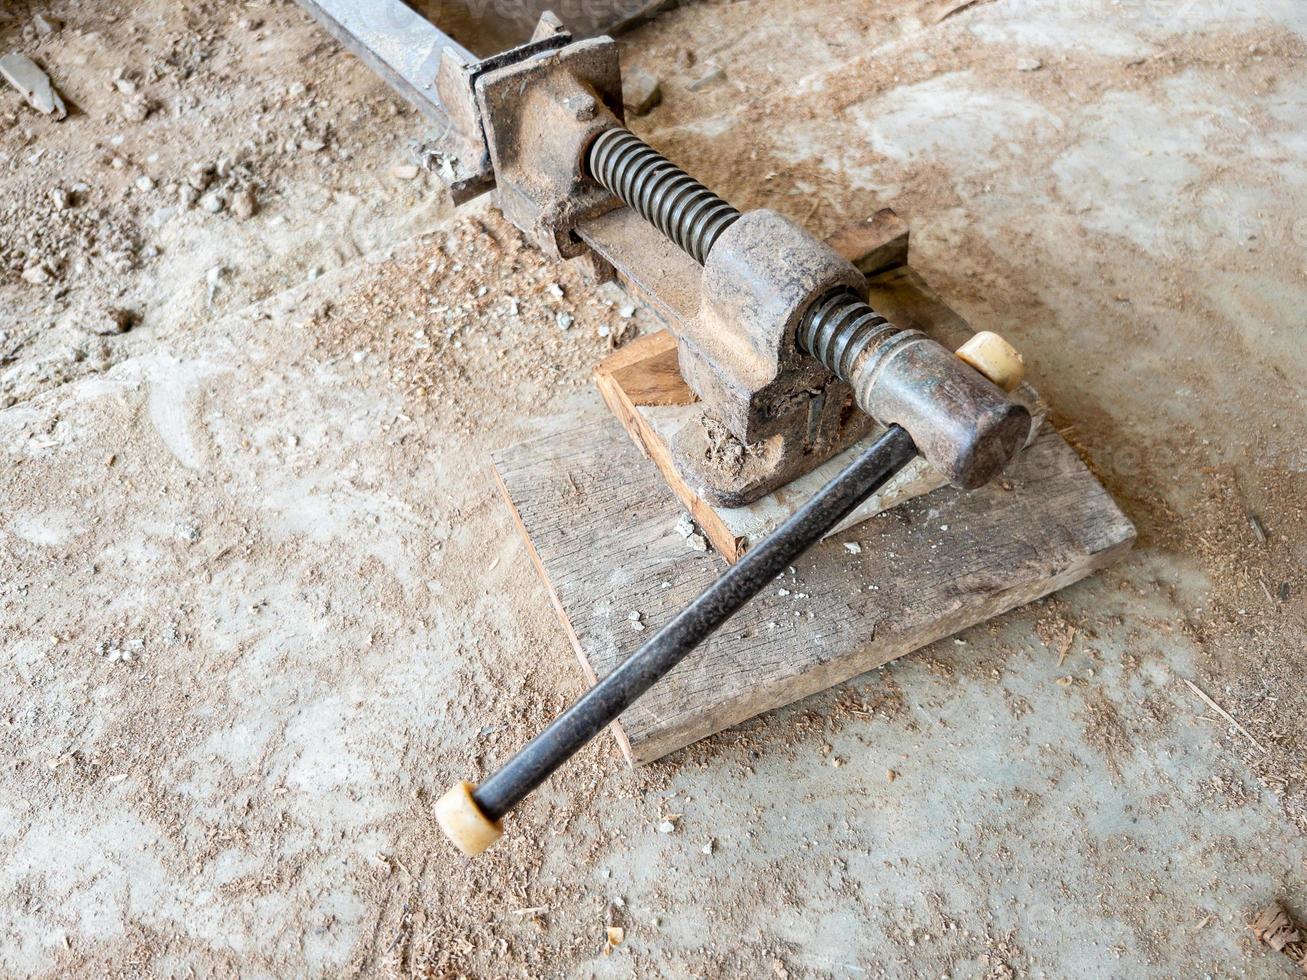 The old clamps tool on the dirty ground for use in the small site. photo